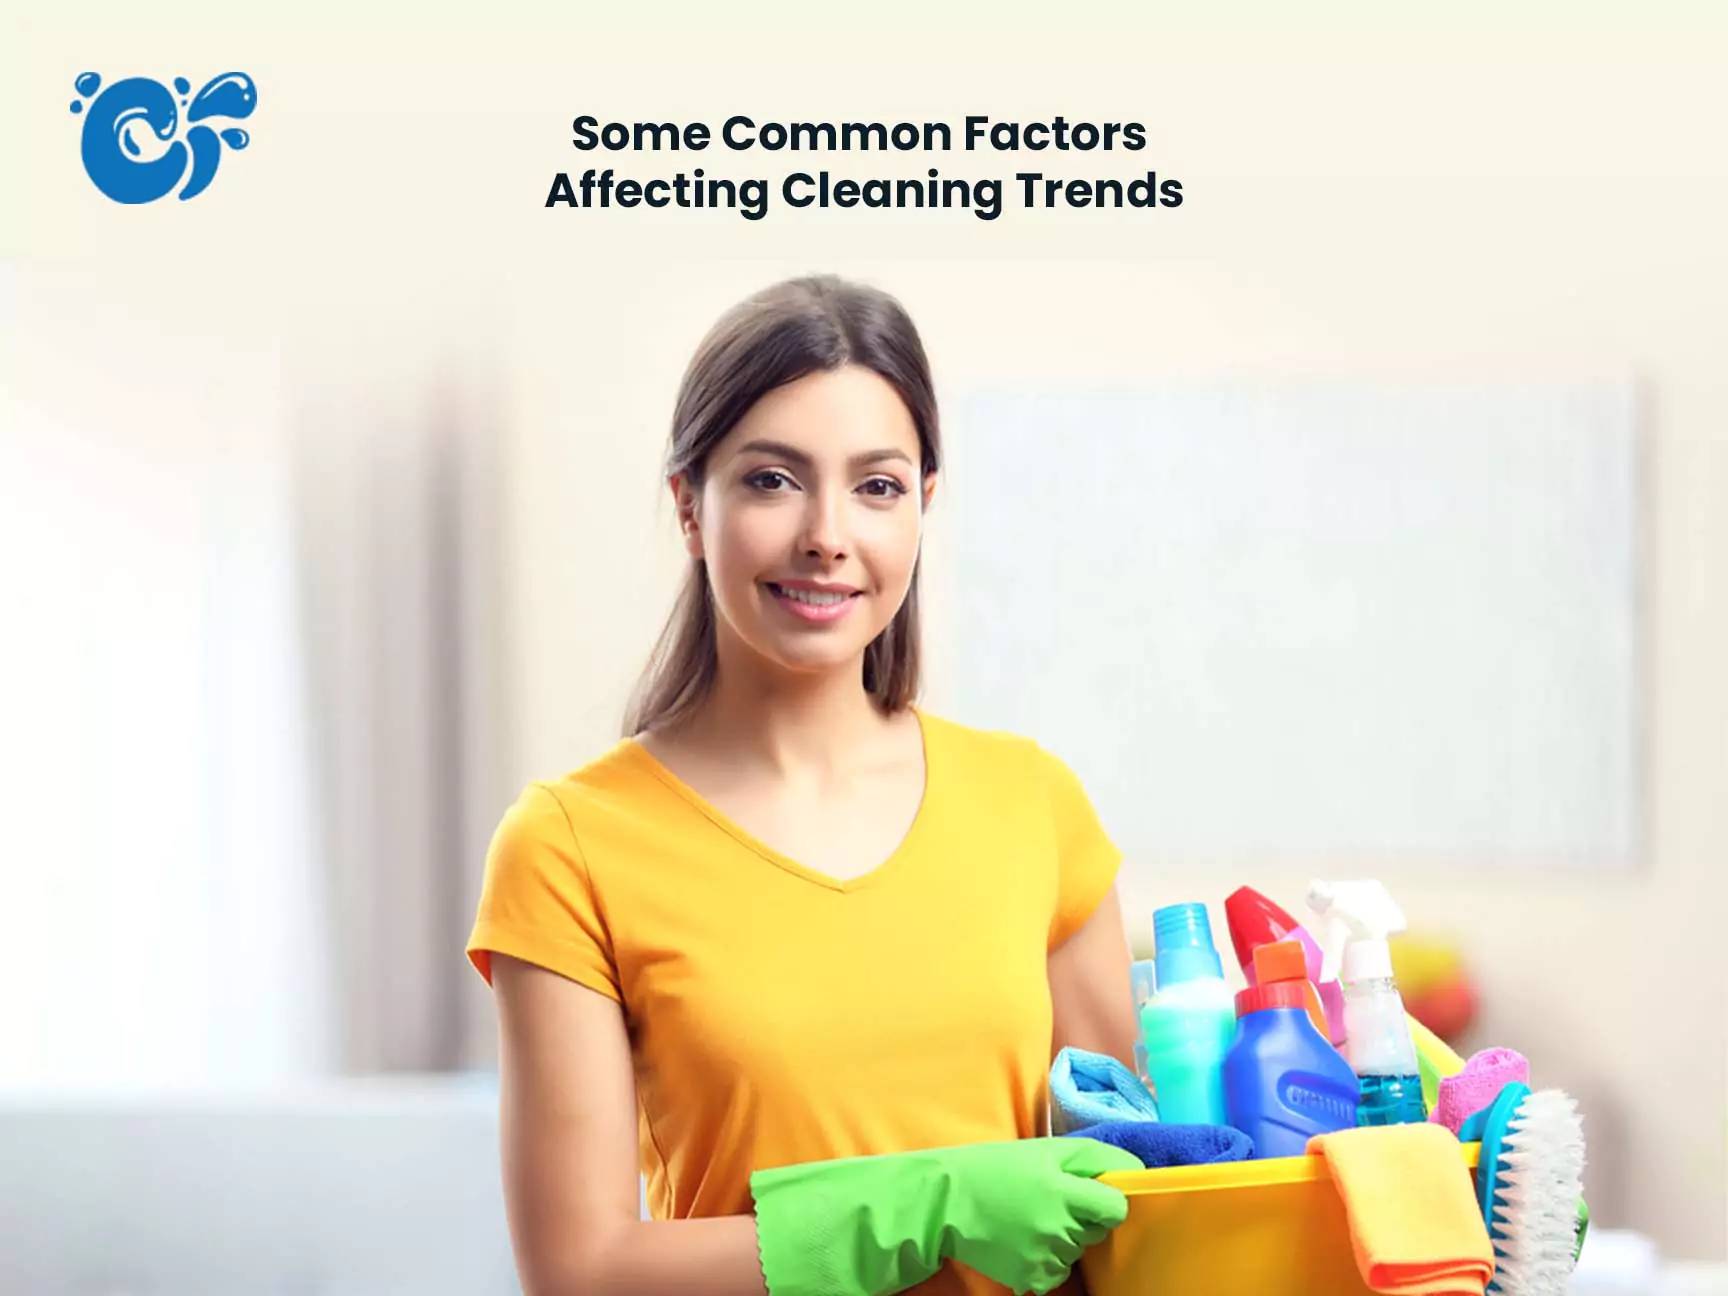 Some Common Factors Affecting Cleaning Trends